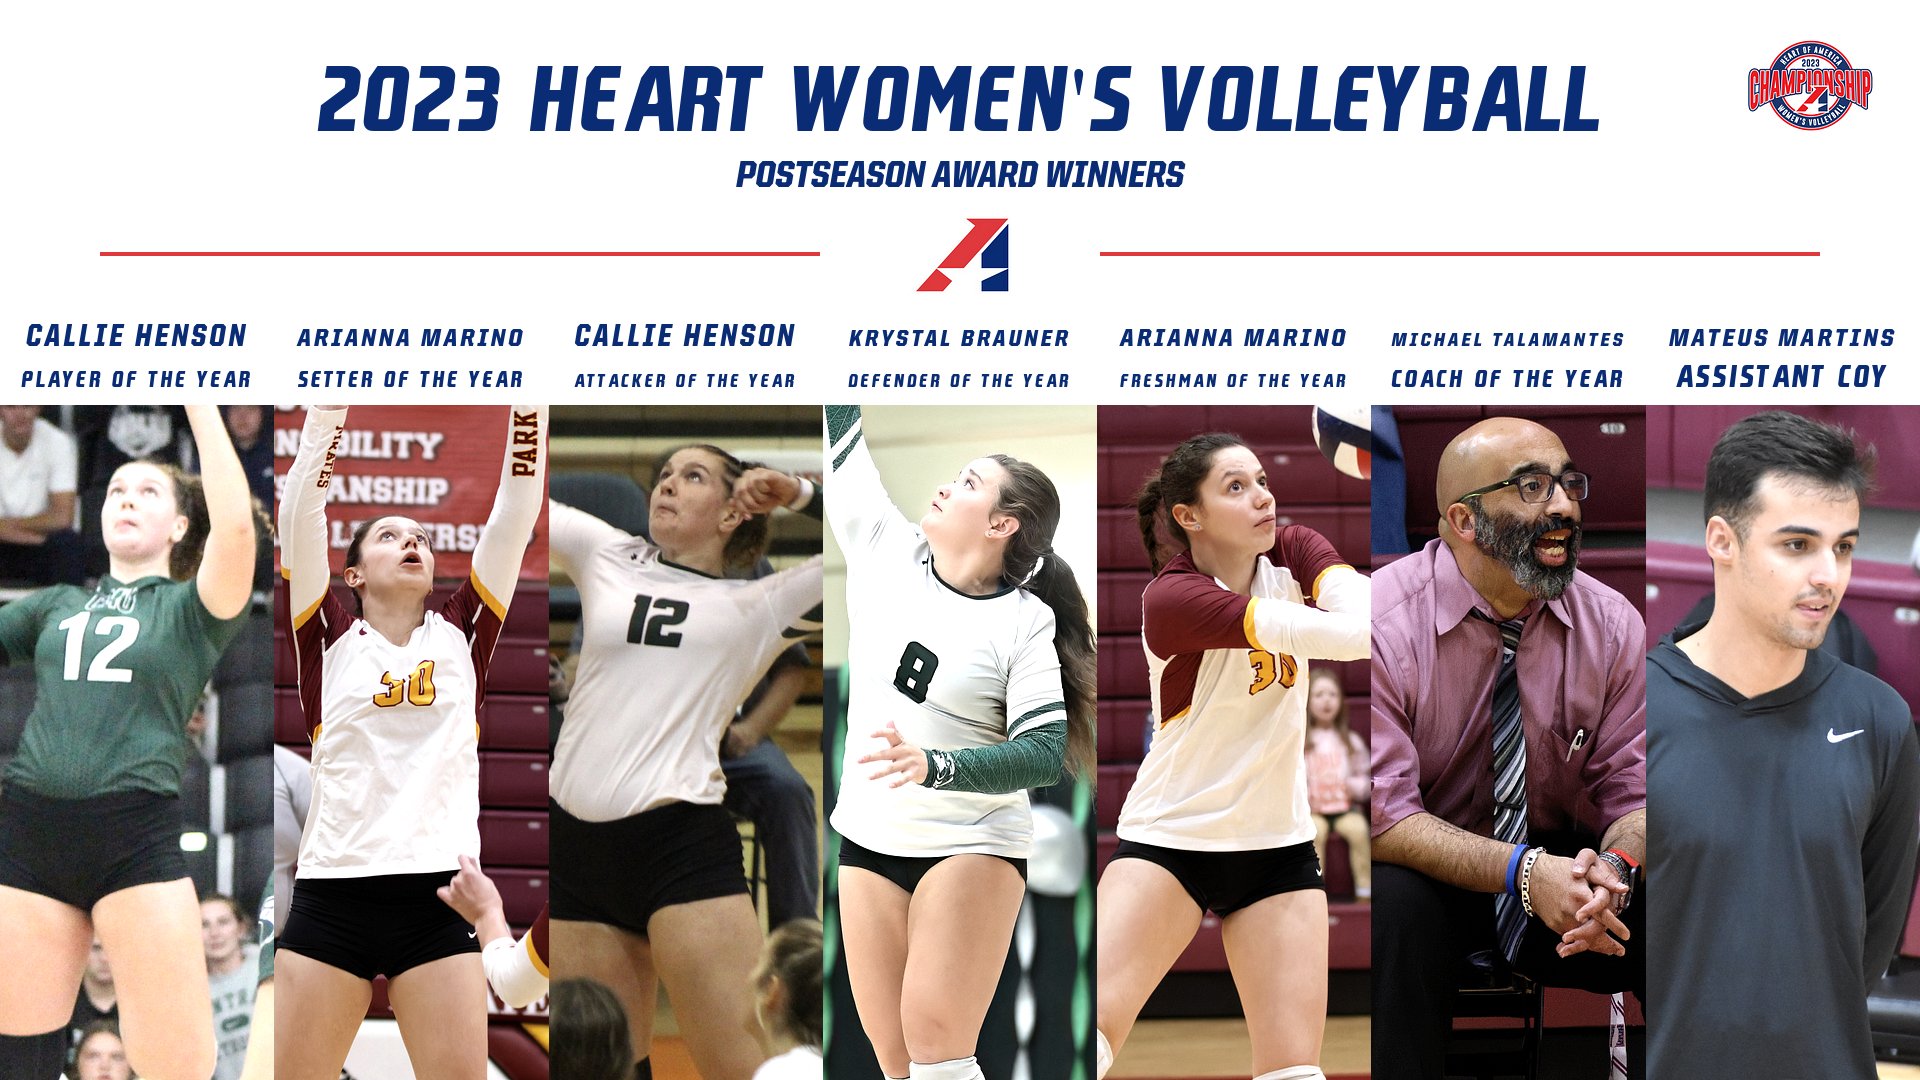 2023 Heart Women&rsquo;s Volleyball All-Conference Teams and Postseason Awards Announced